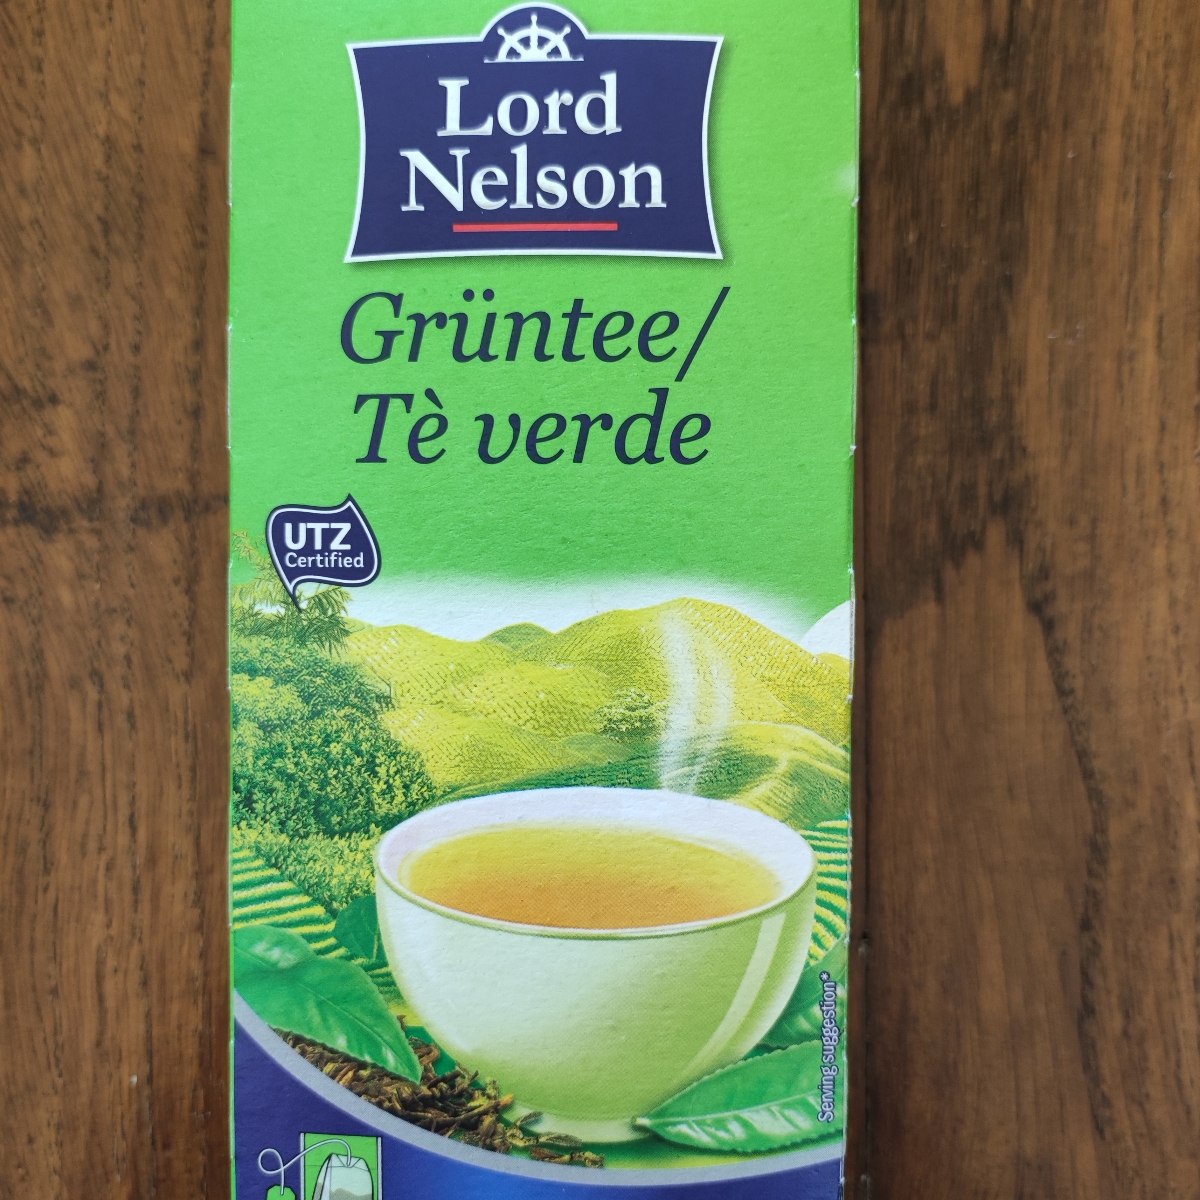 Lord Nelson Green tea Review